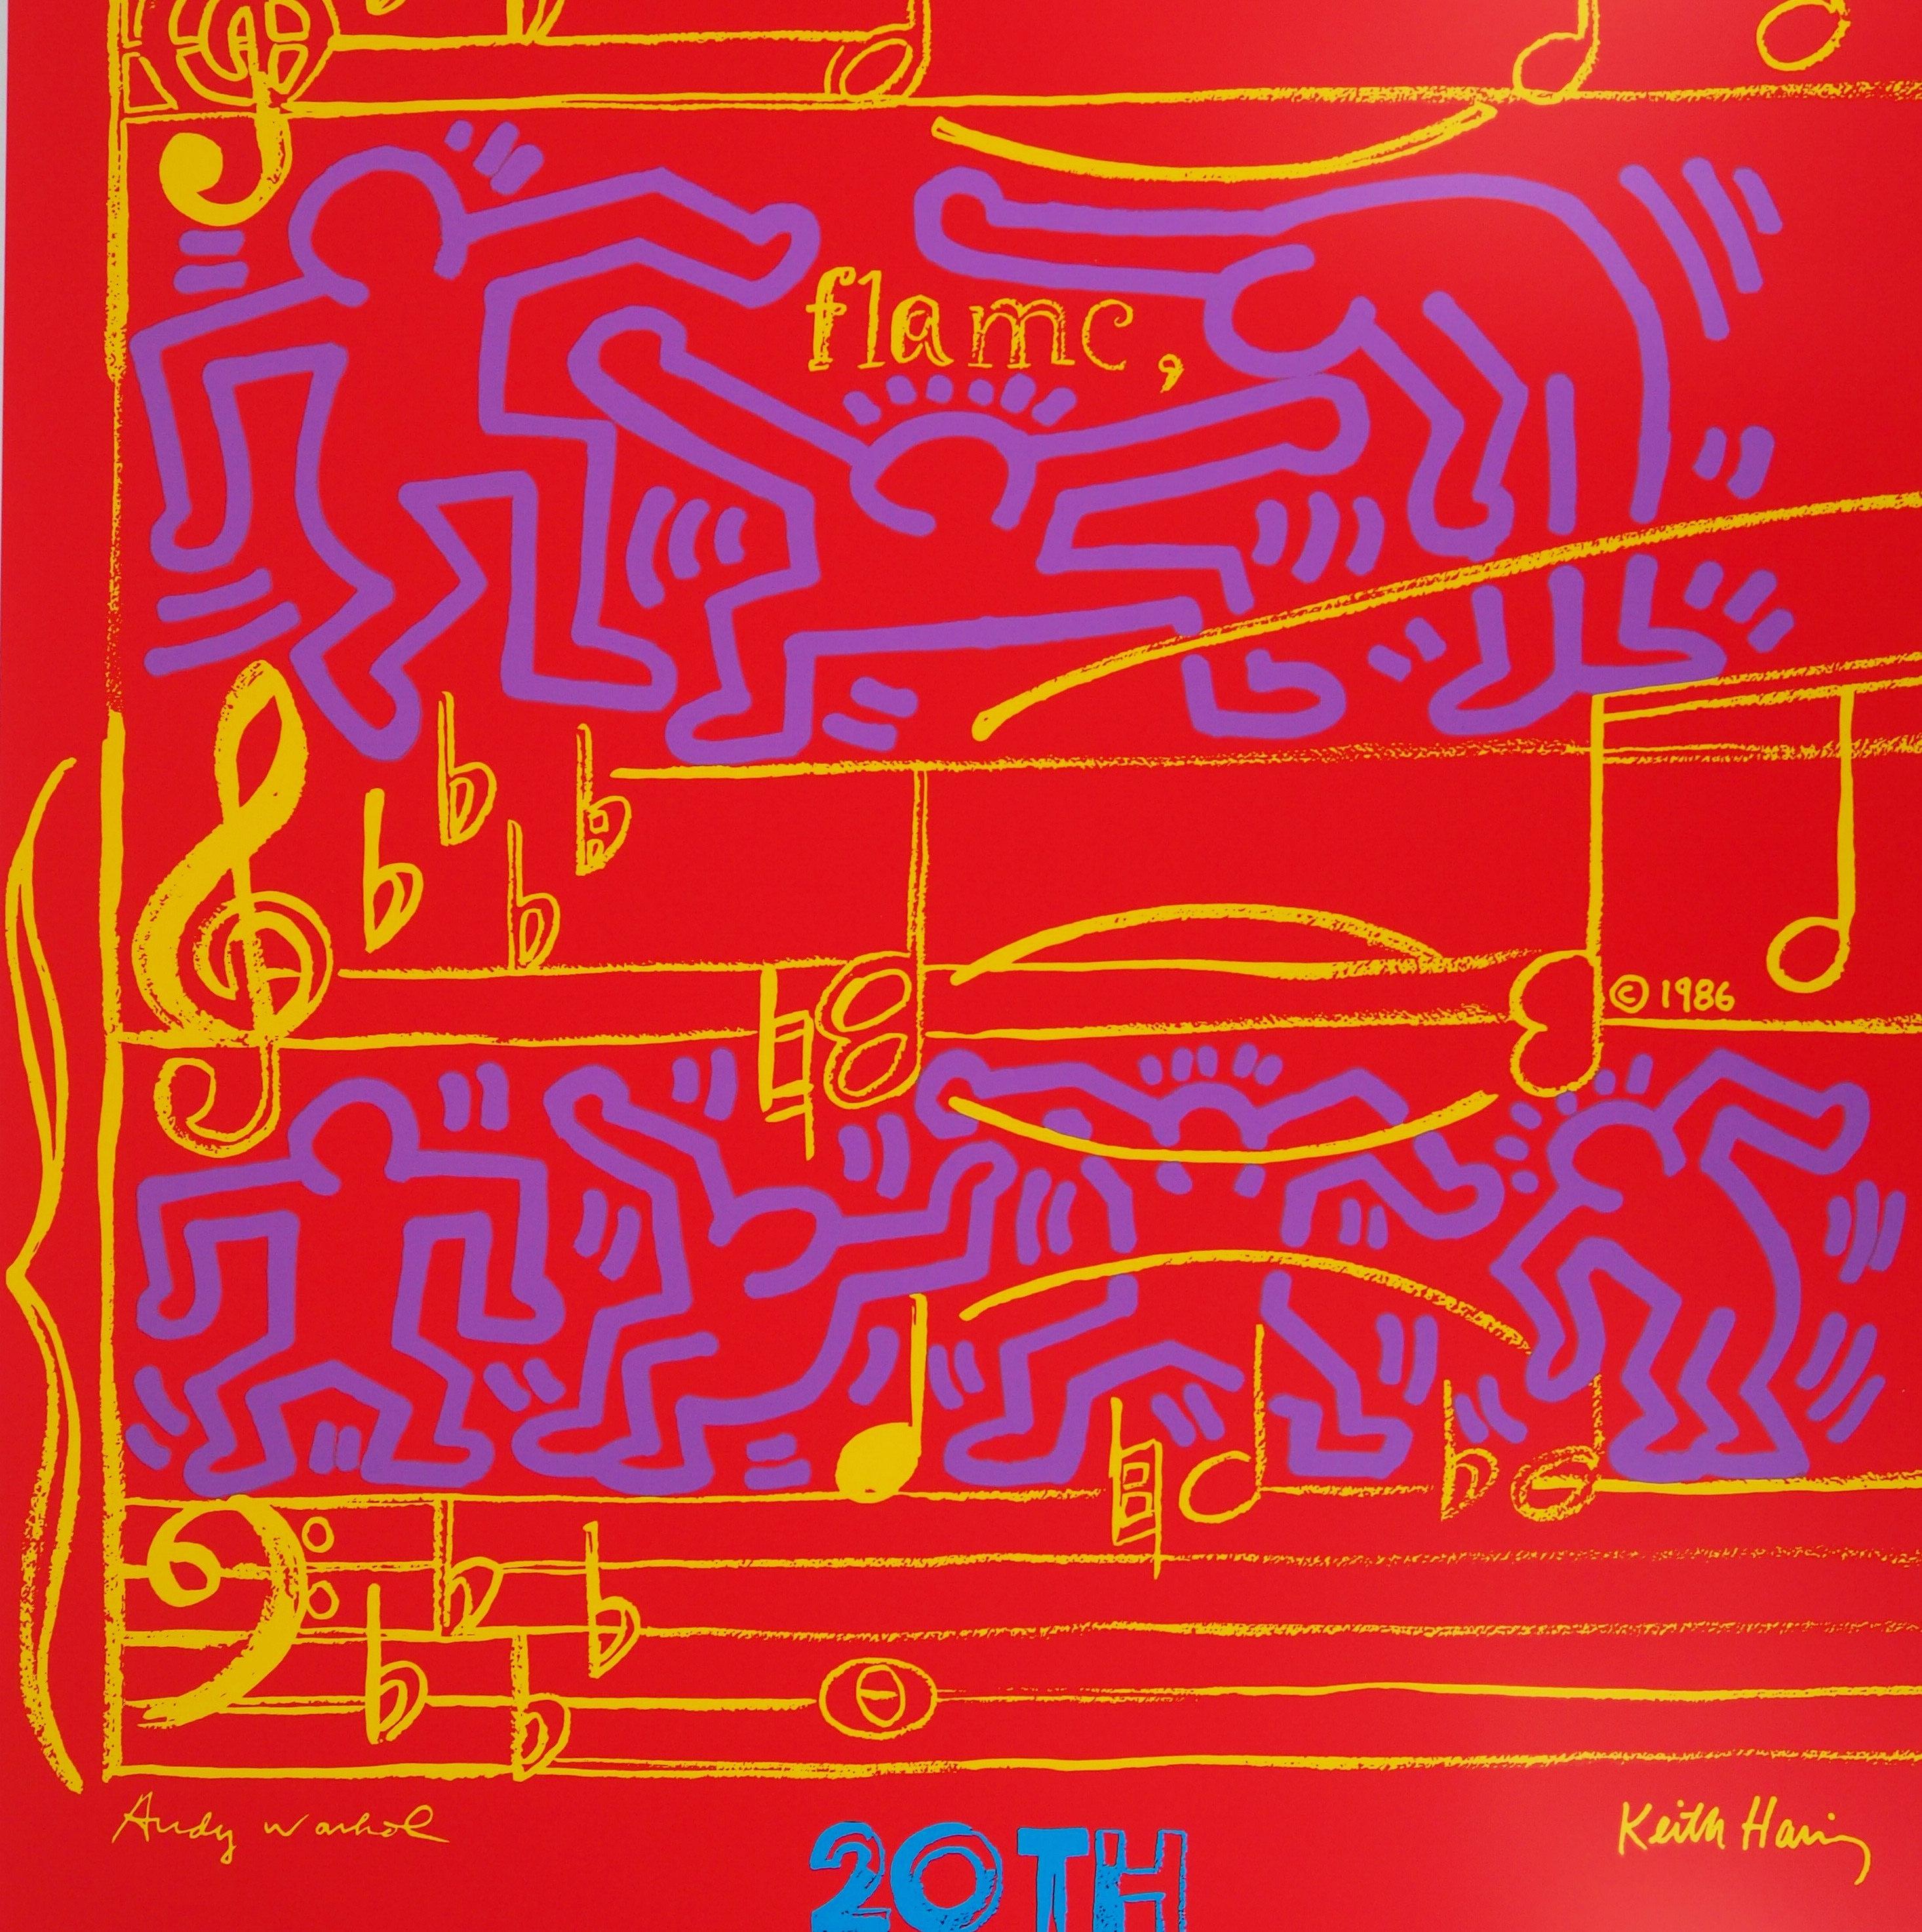 WARHOL & HARING - Jazz, Dancing on Music Sheet - Screenprint Poster, Montreux - Red Figurative Print by Andy Warhol